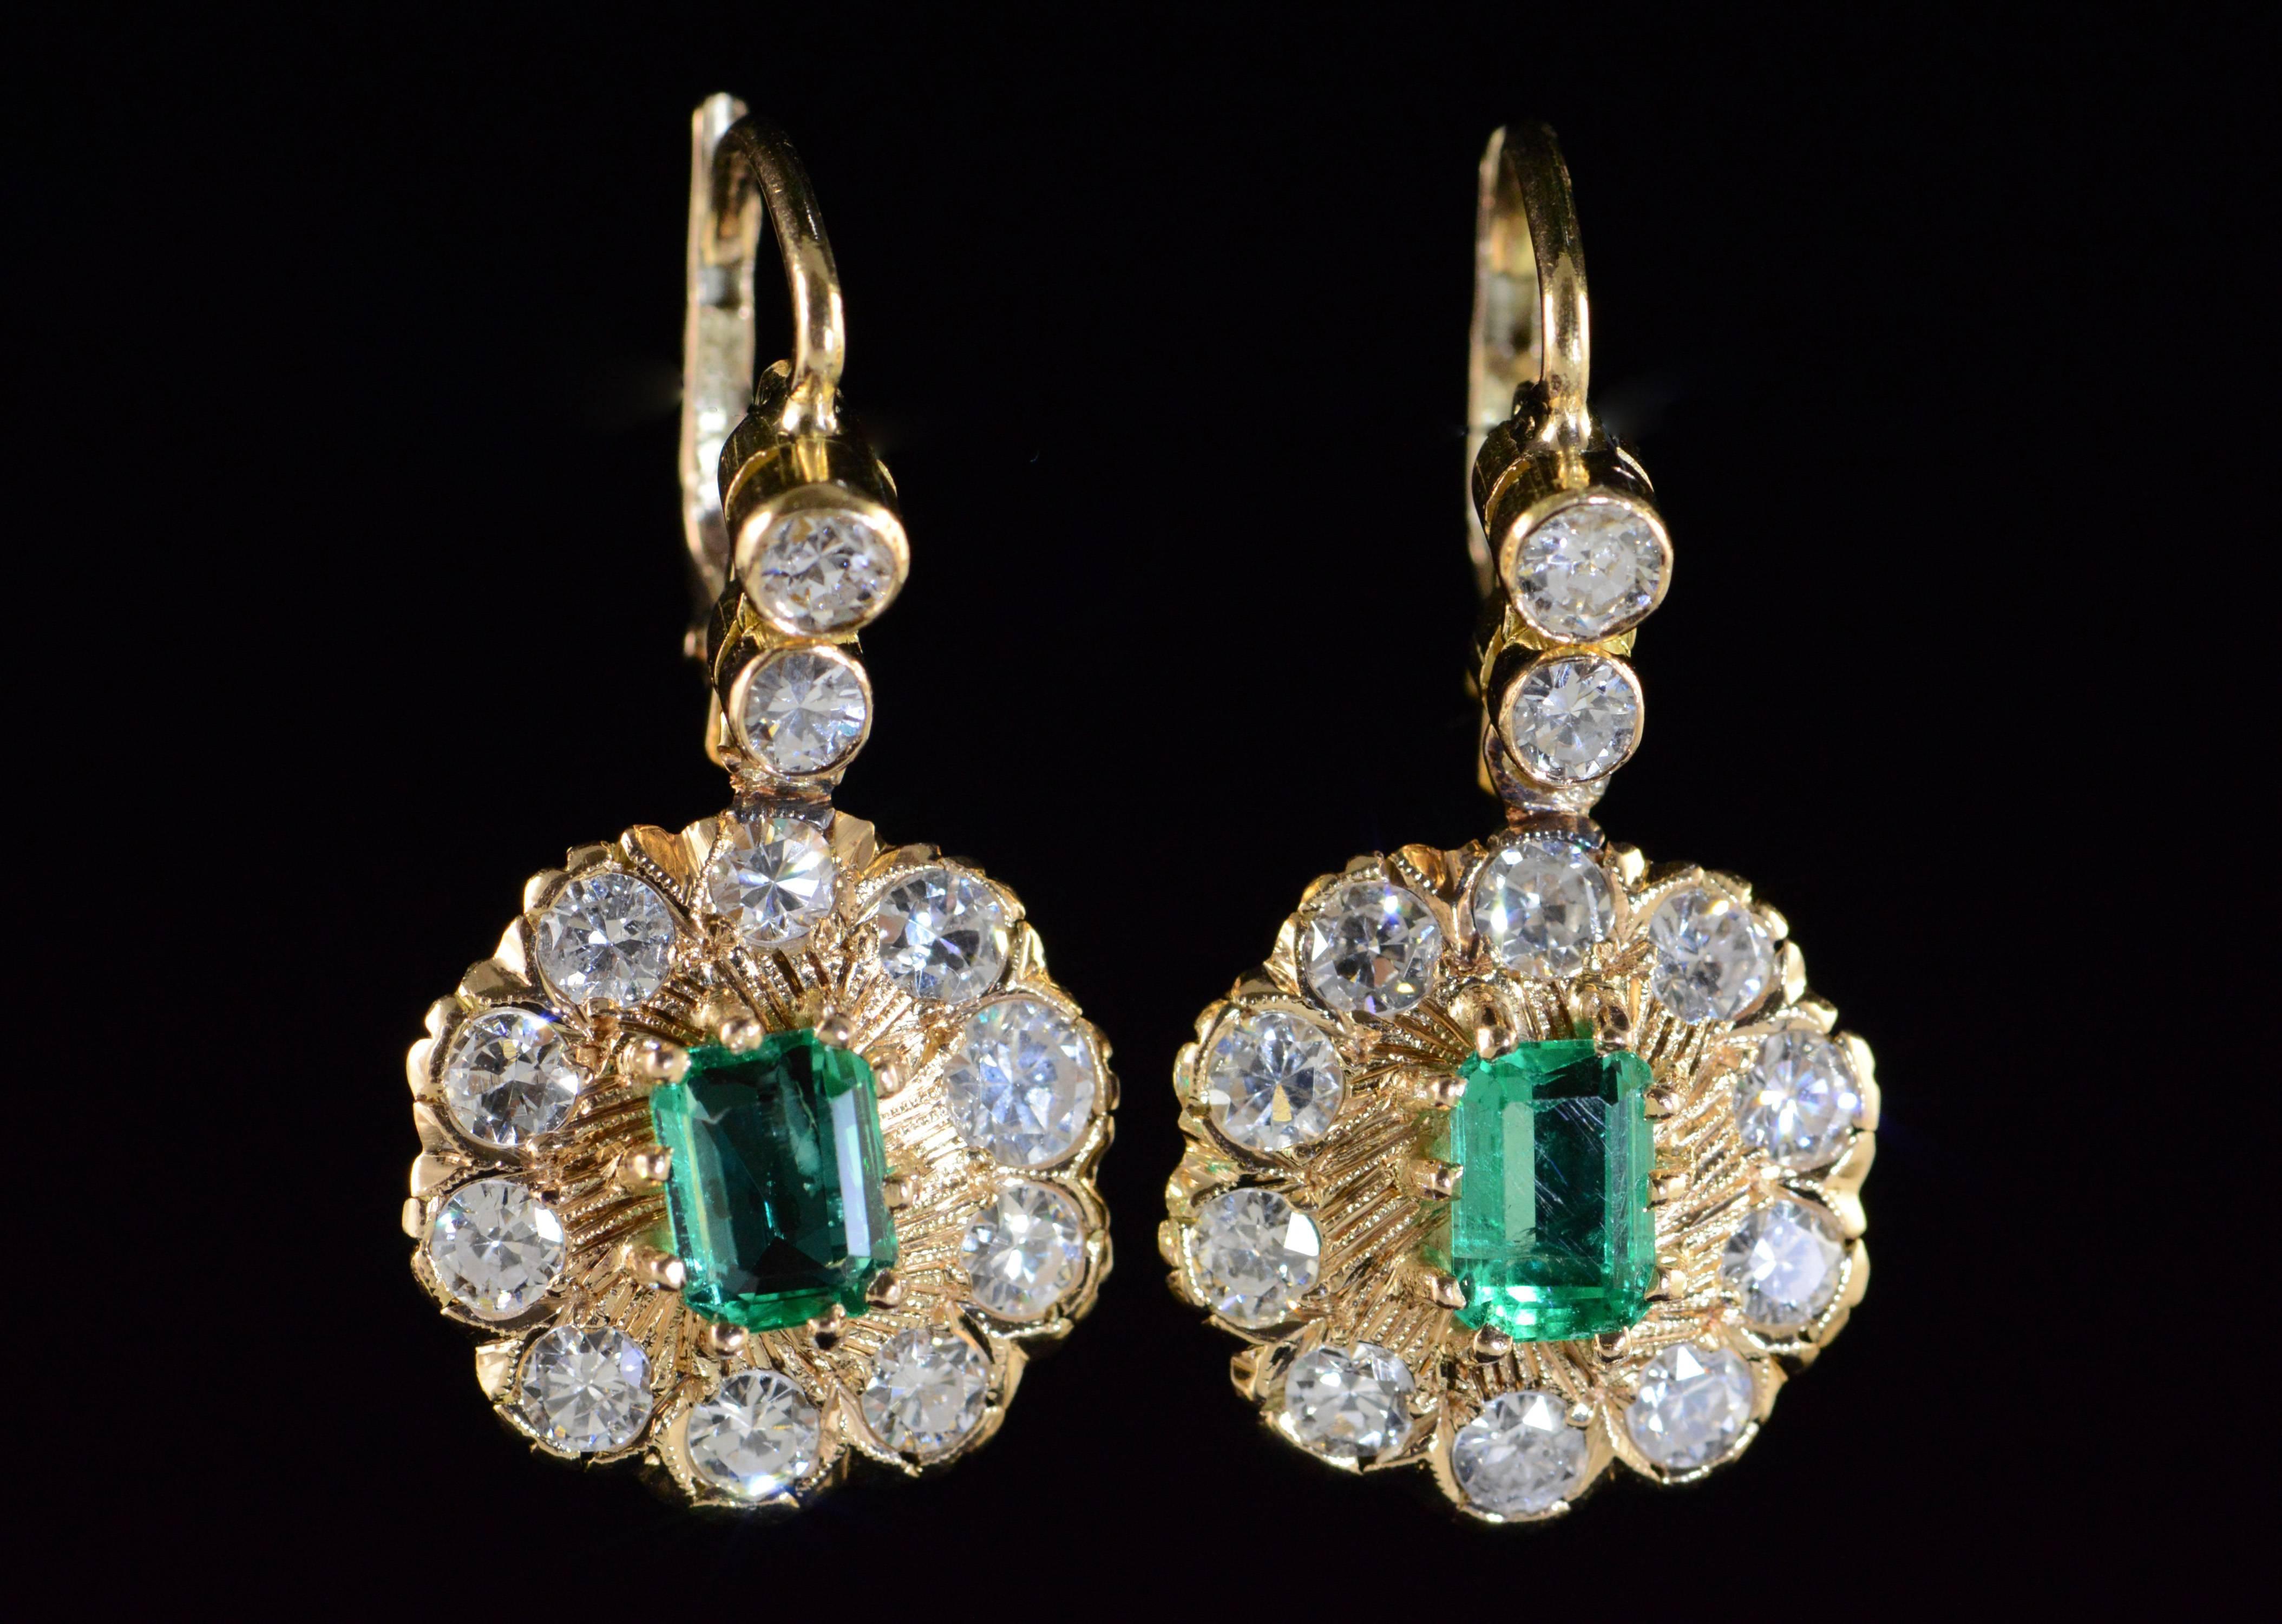 These  drop earrings are set with two beautiful emerald cut emeralds with a brilliant deep green coloration and excellent, even color saturation. The earrings were likely converted to lever backs at a later date for more secure wear and provide a